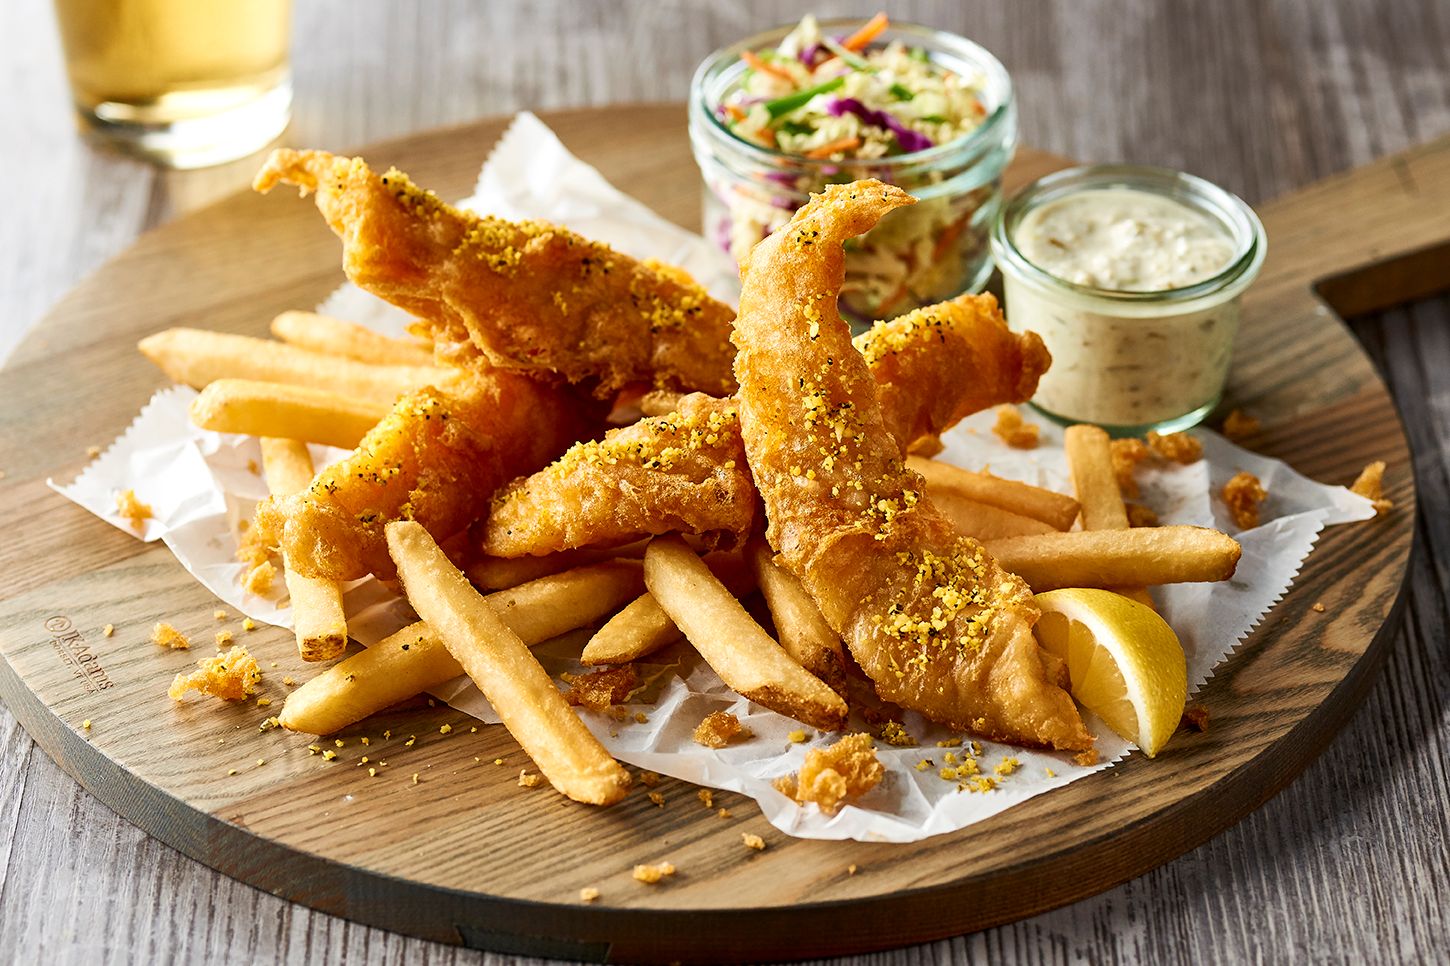 Crunchy Fish & Chips